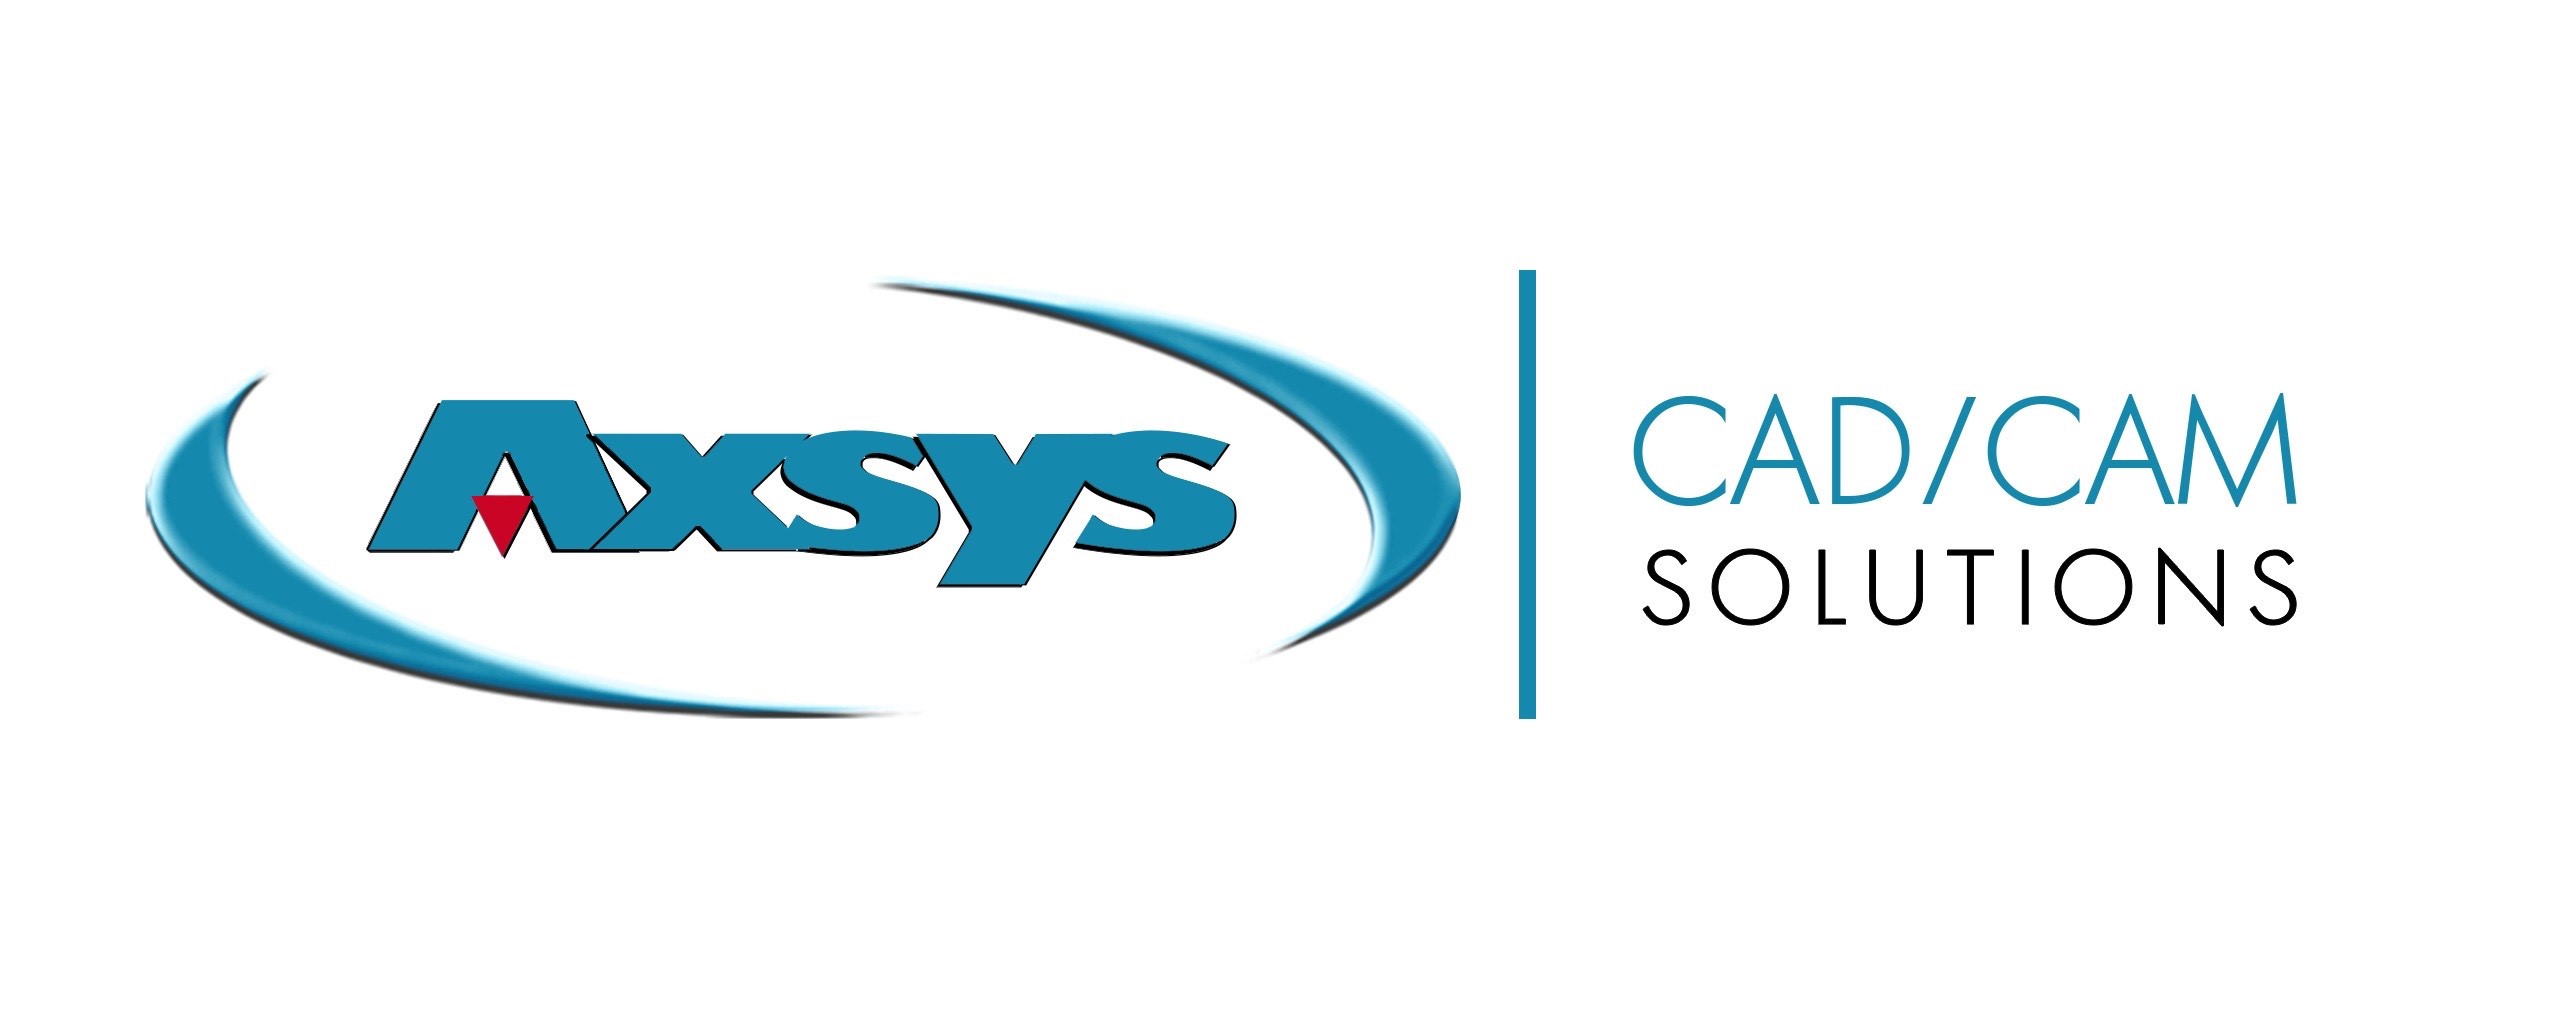 New-Axsys-Logo-with-CAD-CAM-solutions-1